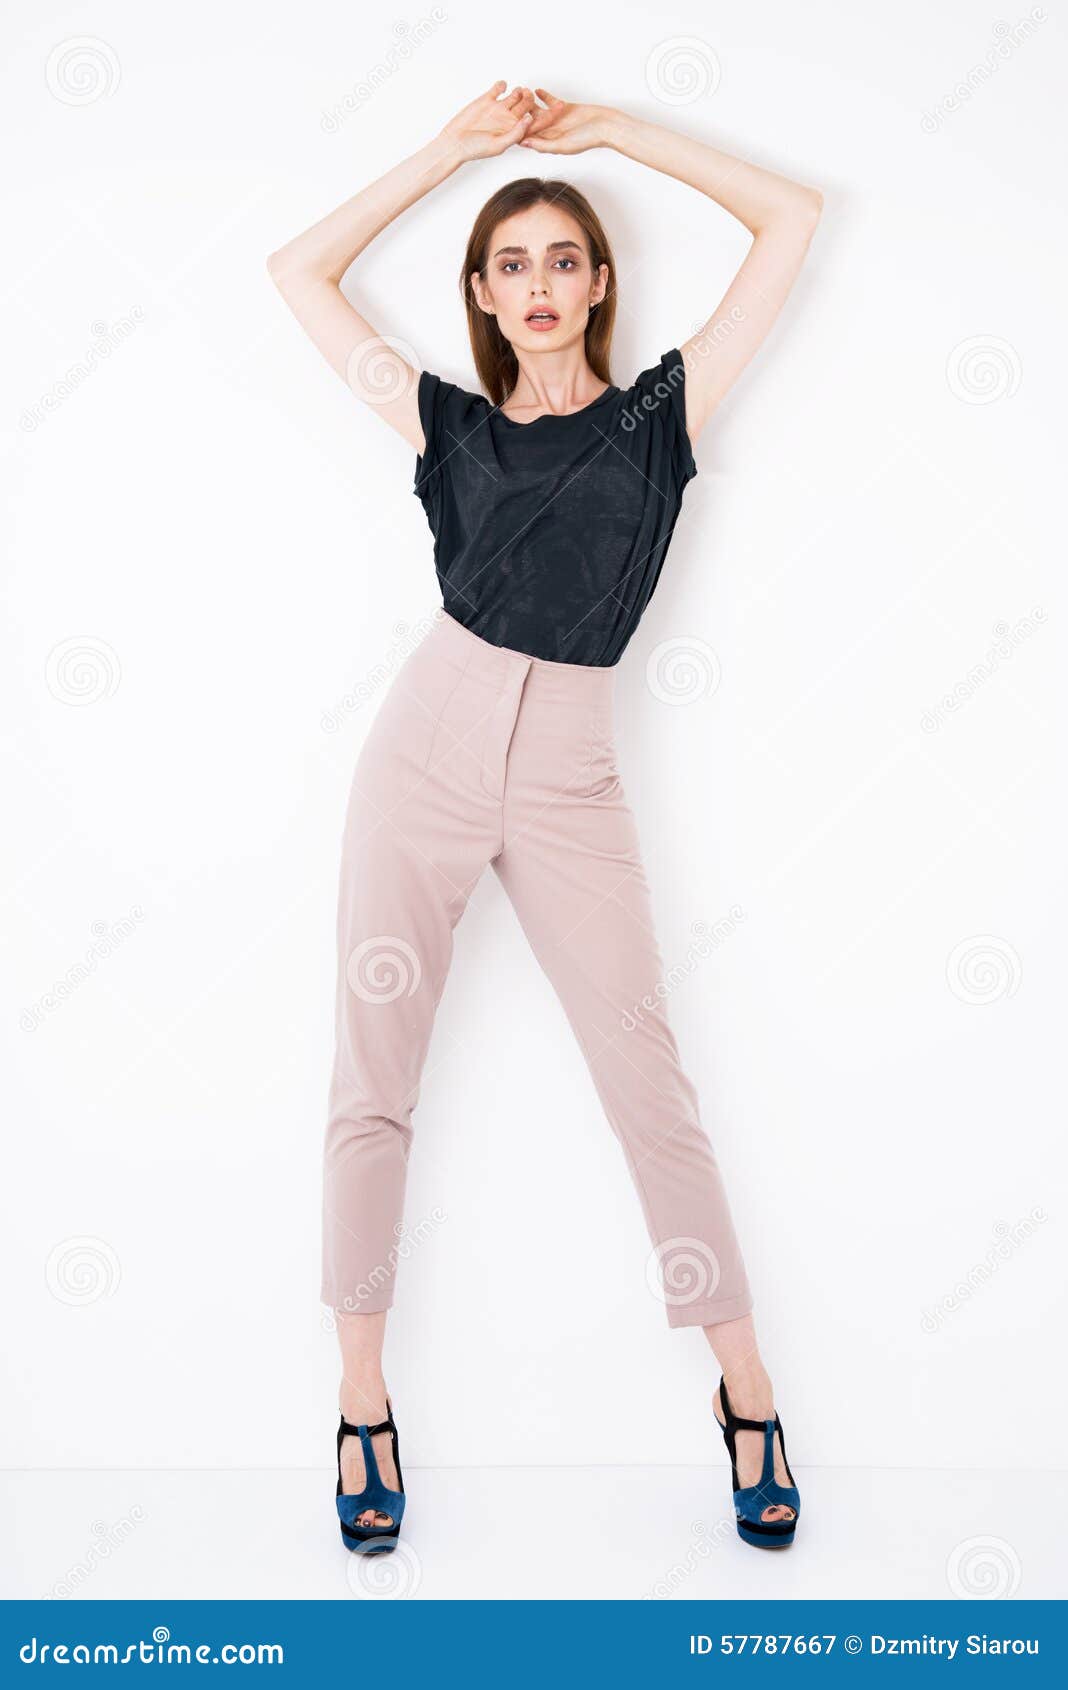 Model Pose on White Background in Studio Stock Image - Image of model,  people: 57787667